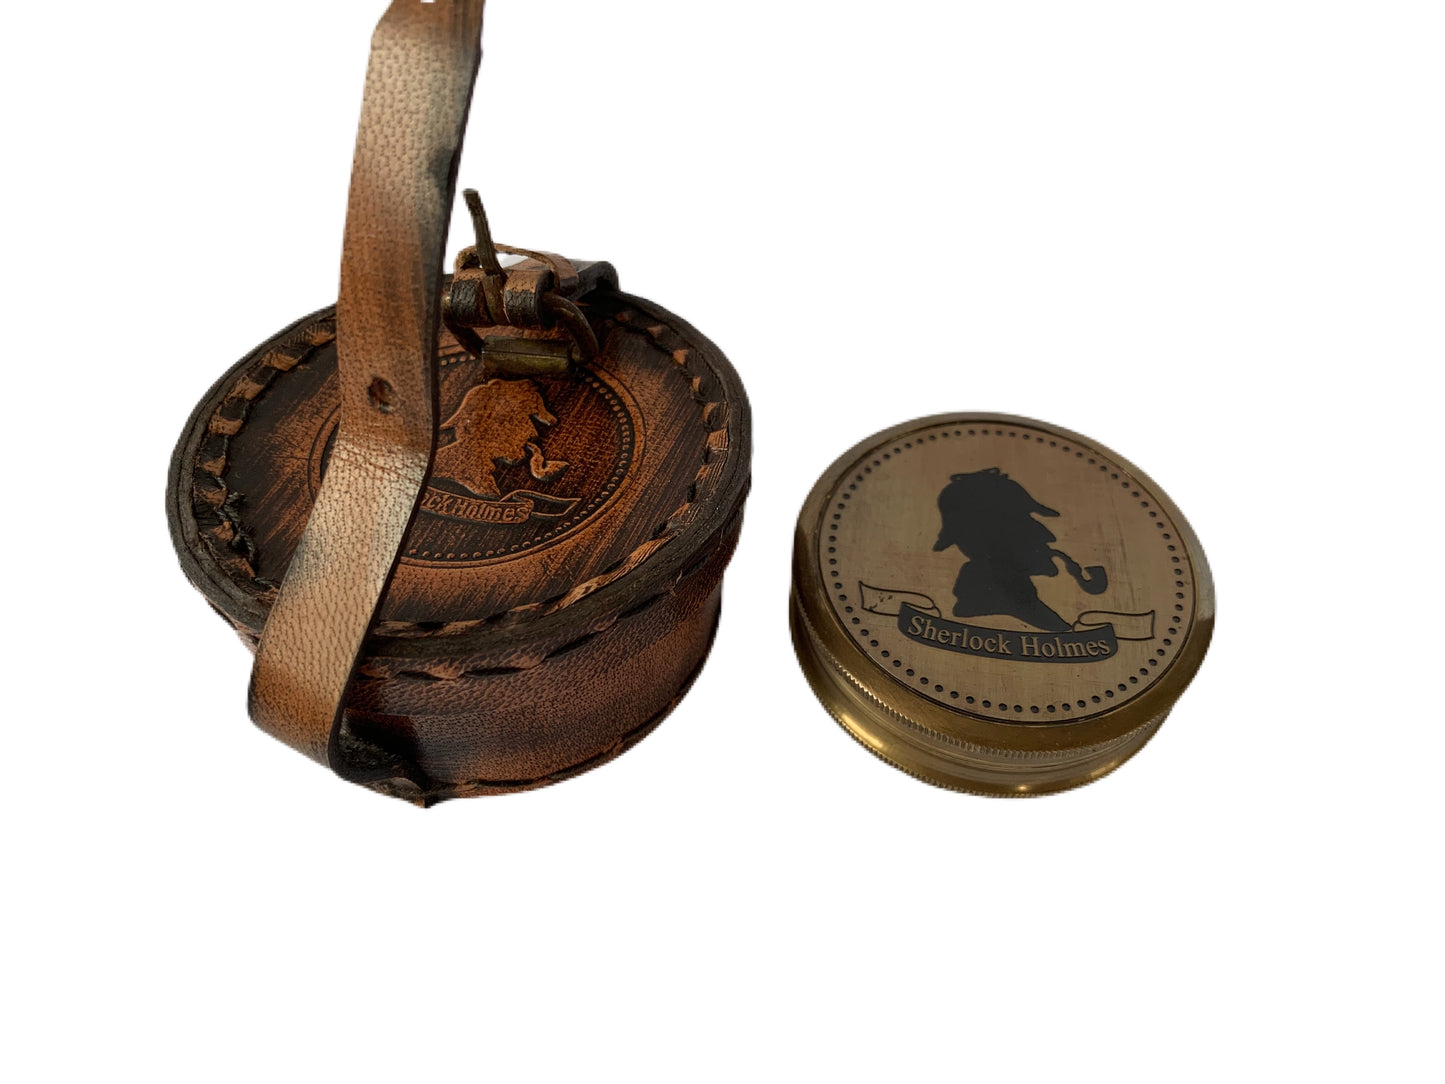 Sherlock Holmes Compass with Case